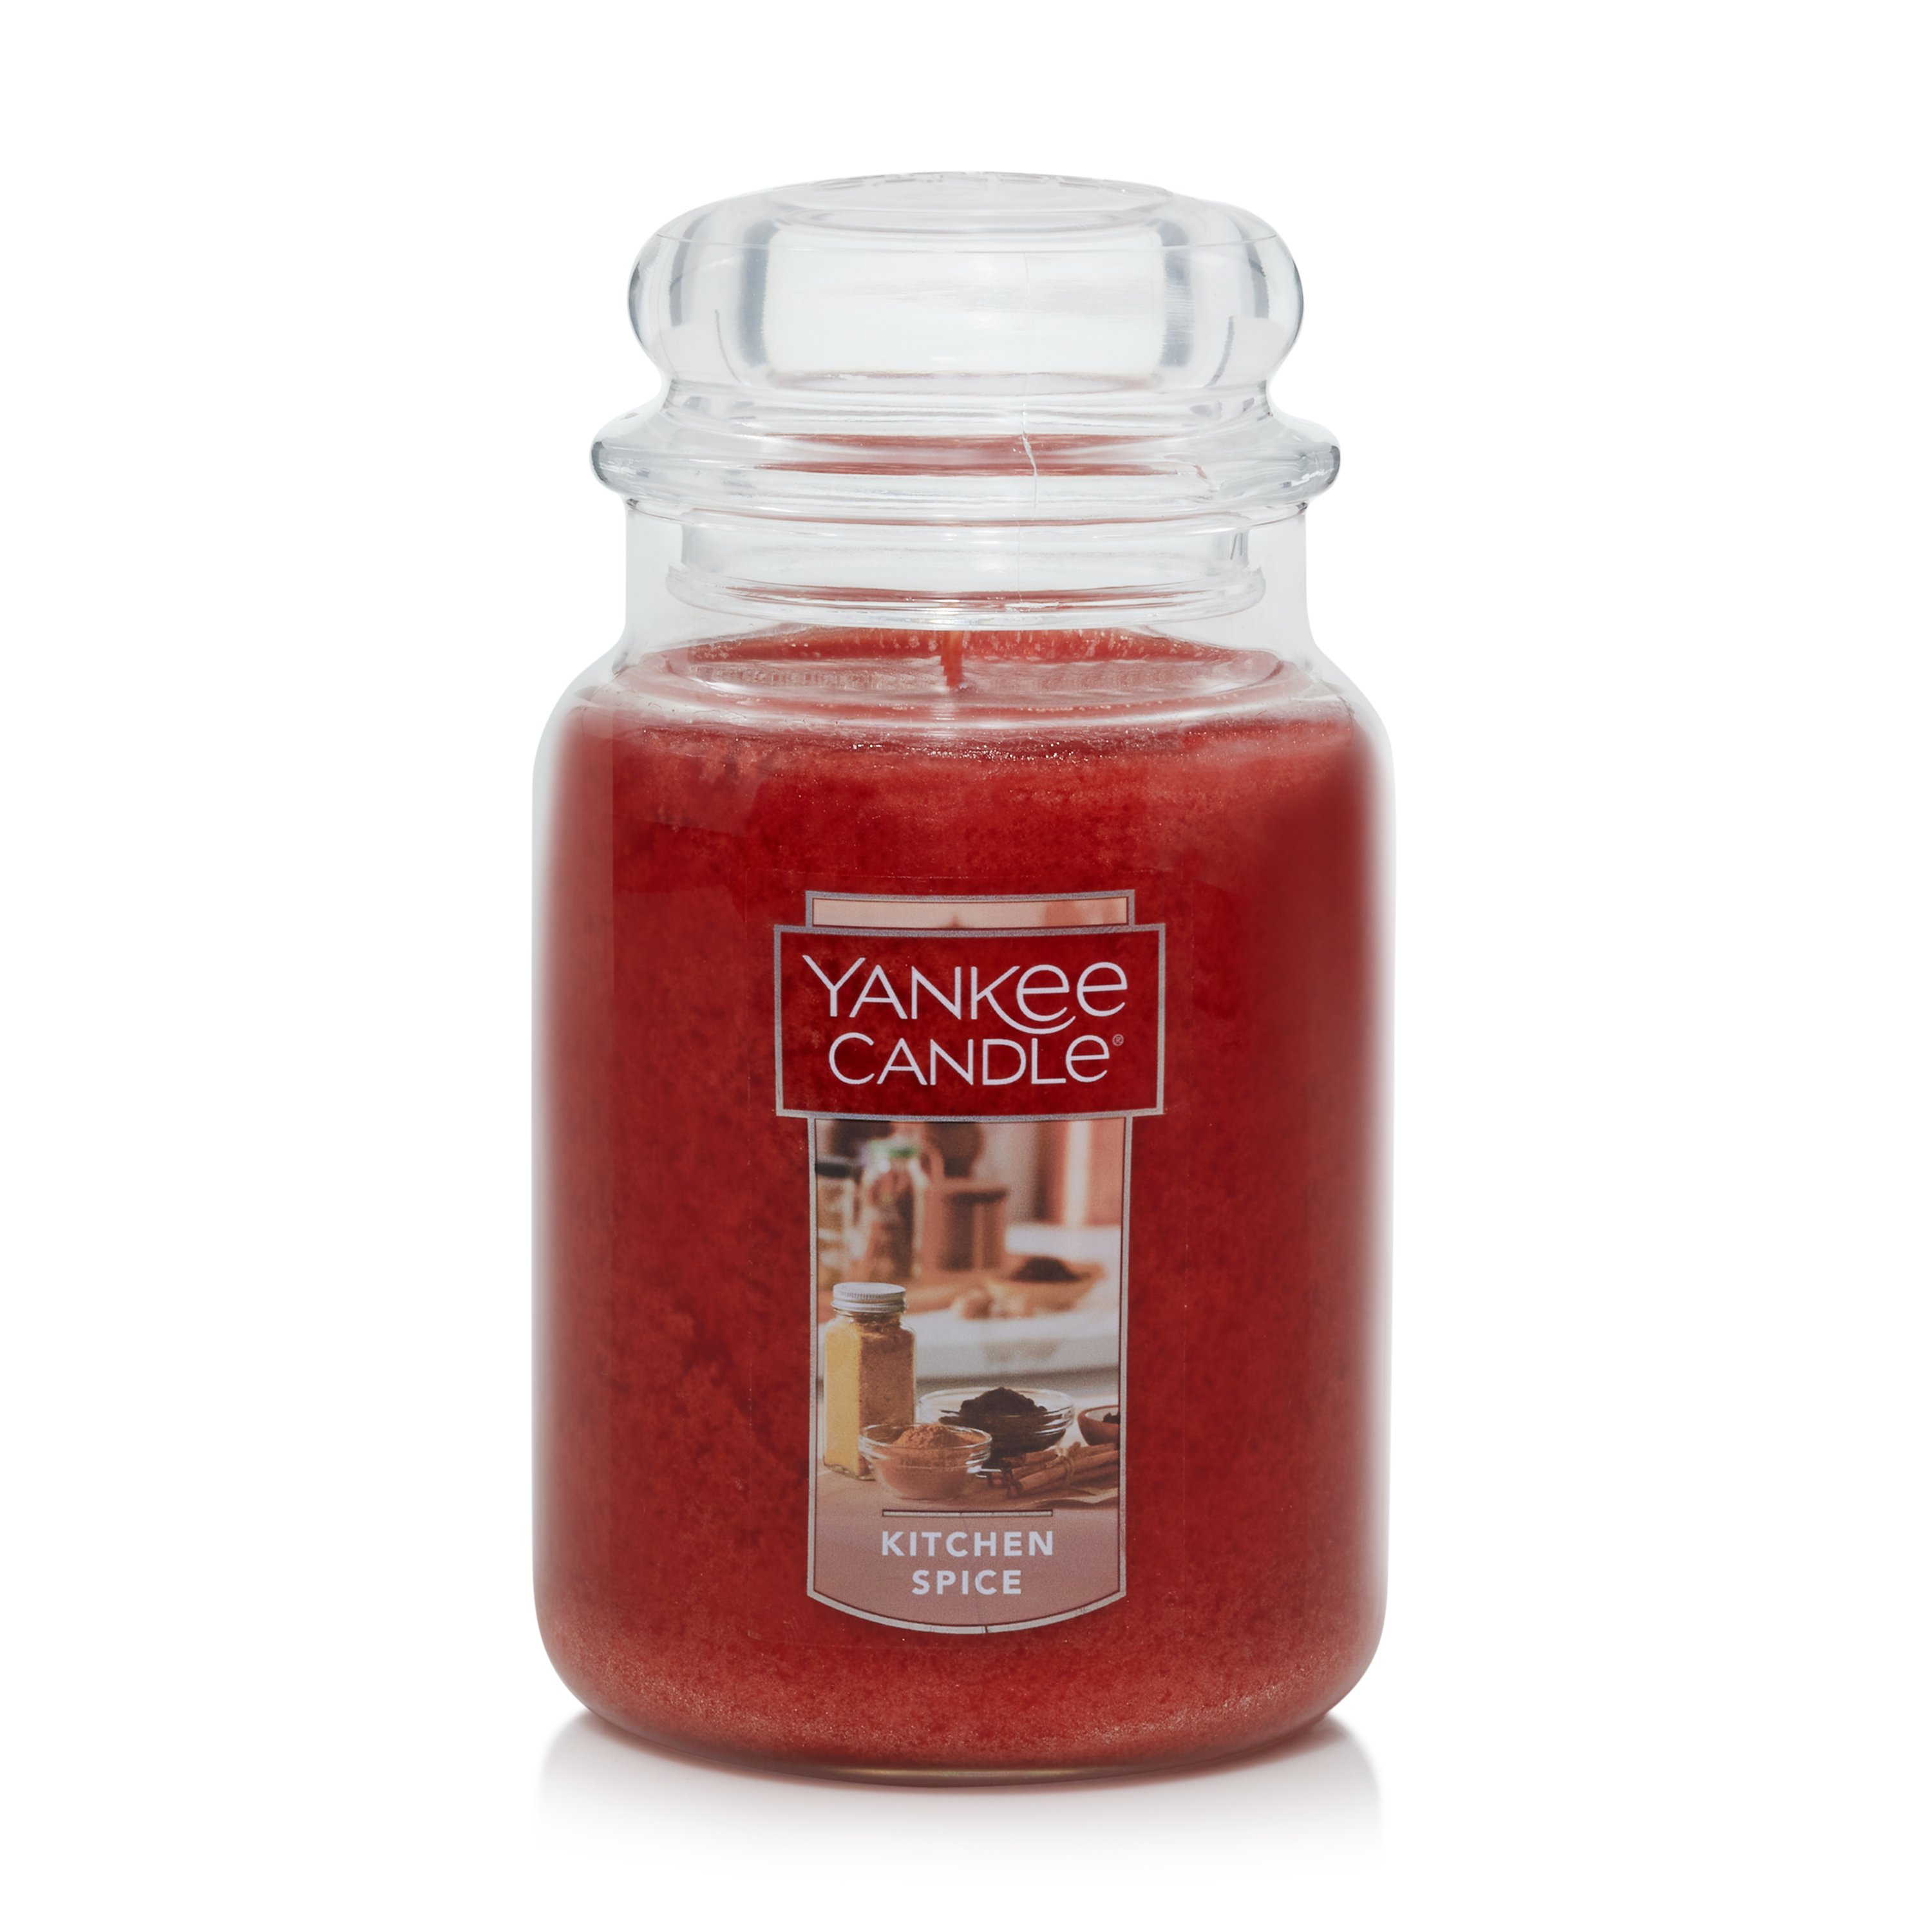 Yankee Candle Candle, Kitchen Spice - 1 candle, 22 oz